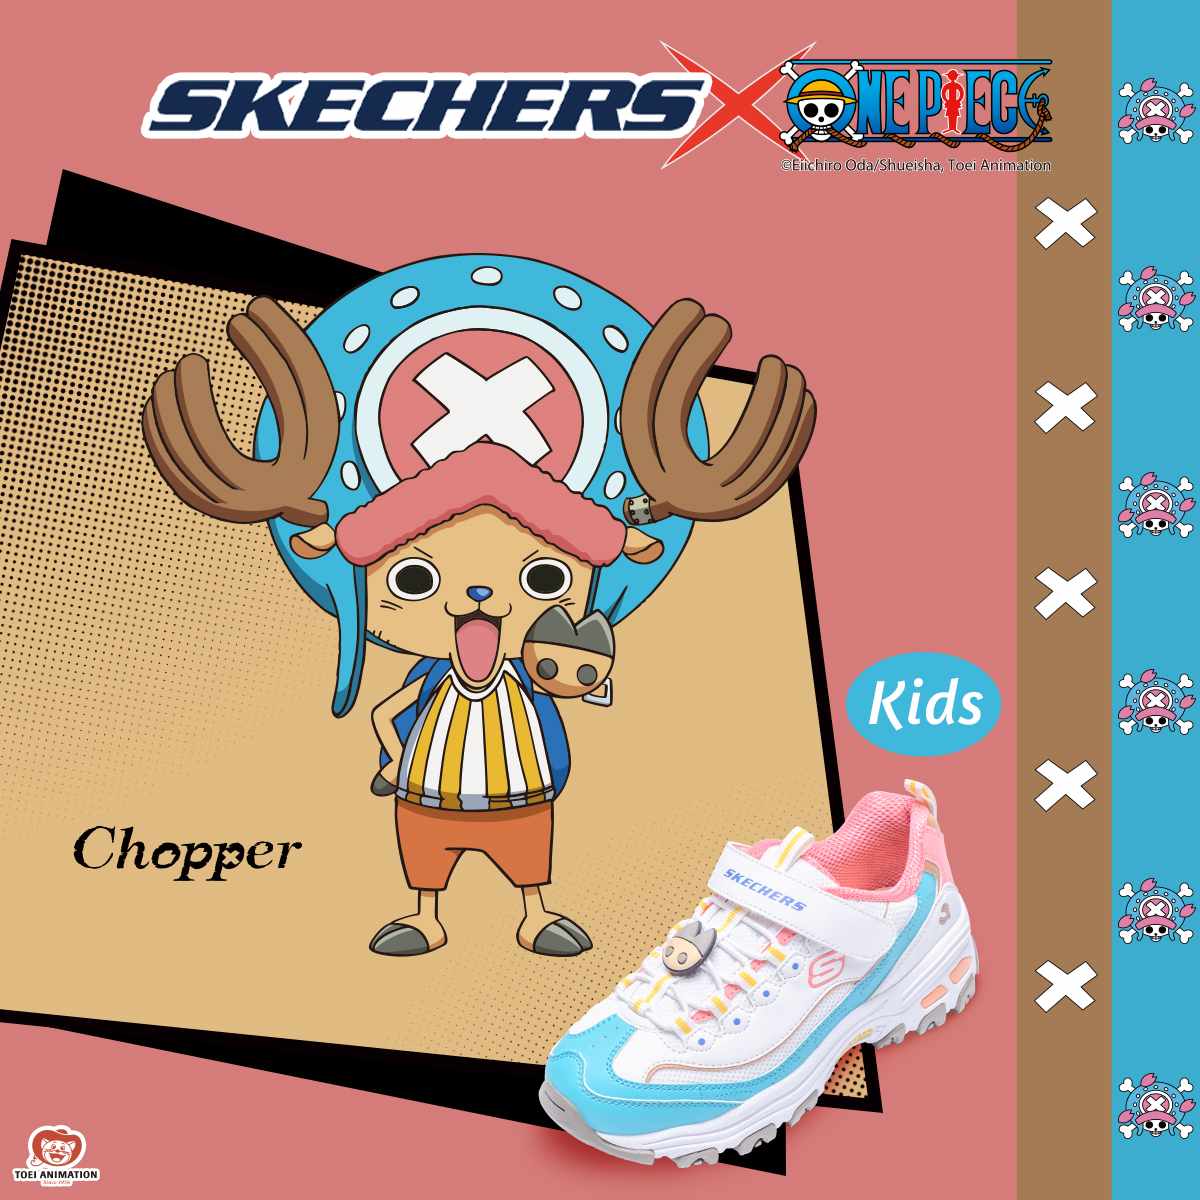 curva trabajo duro encender un fuego Skechers x One Piece Collection Featuring Chopper (Kids Selection) -  KINGSSLEEVE